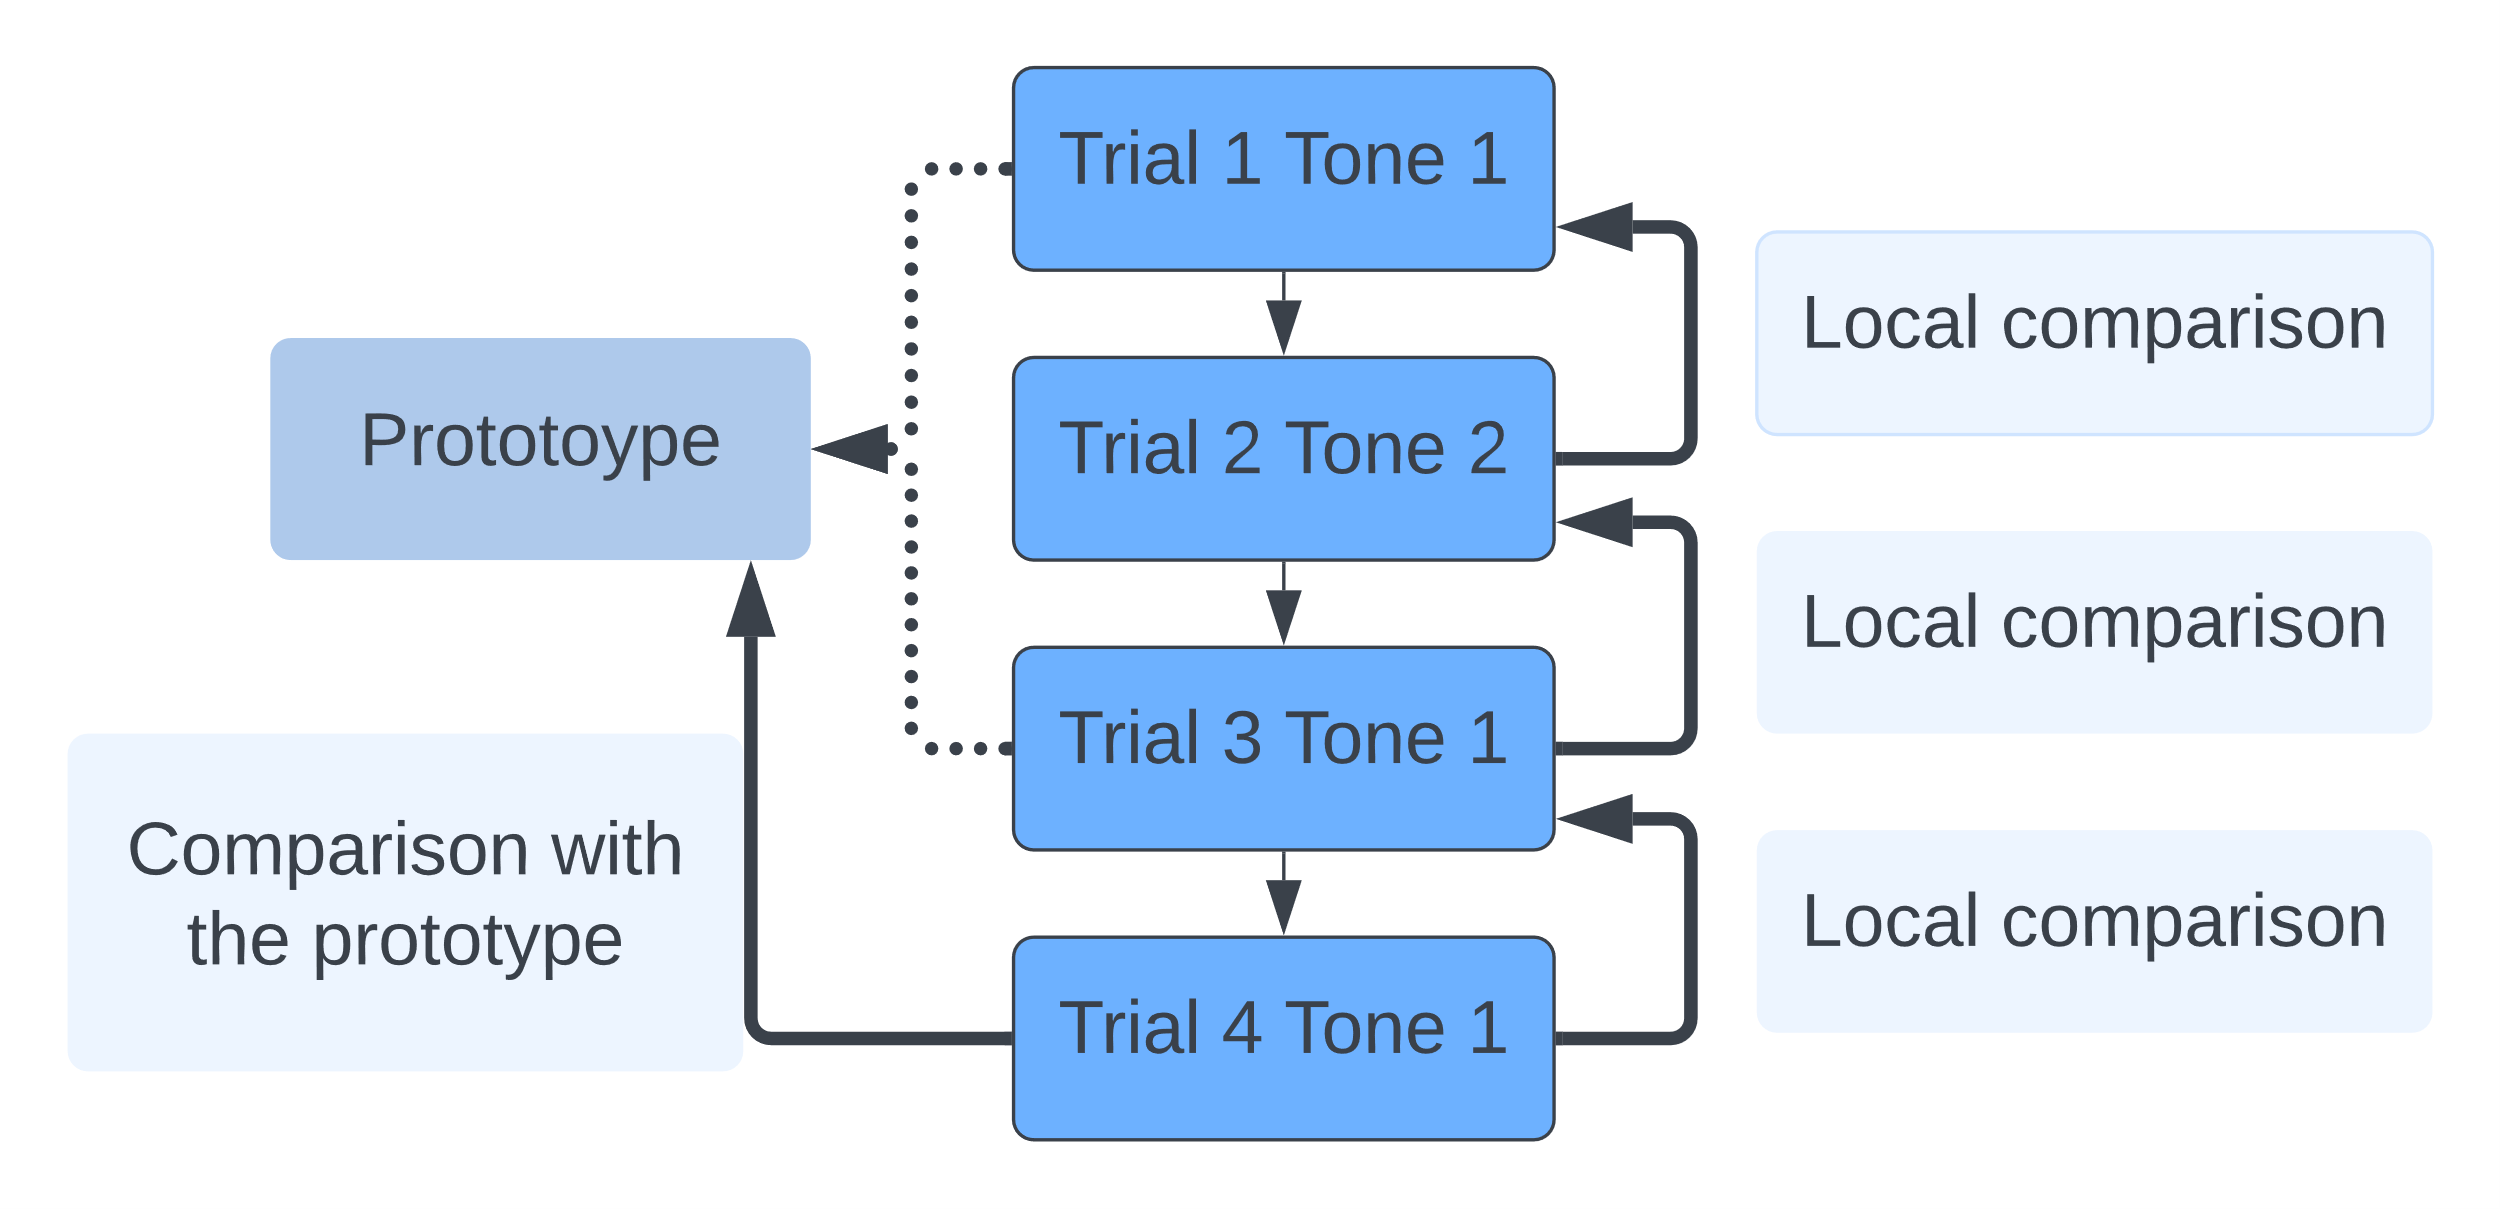 The diagram uses four trials of experiment data to show how local comparisons and prototype comparisons occur.